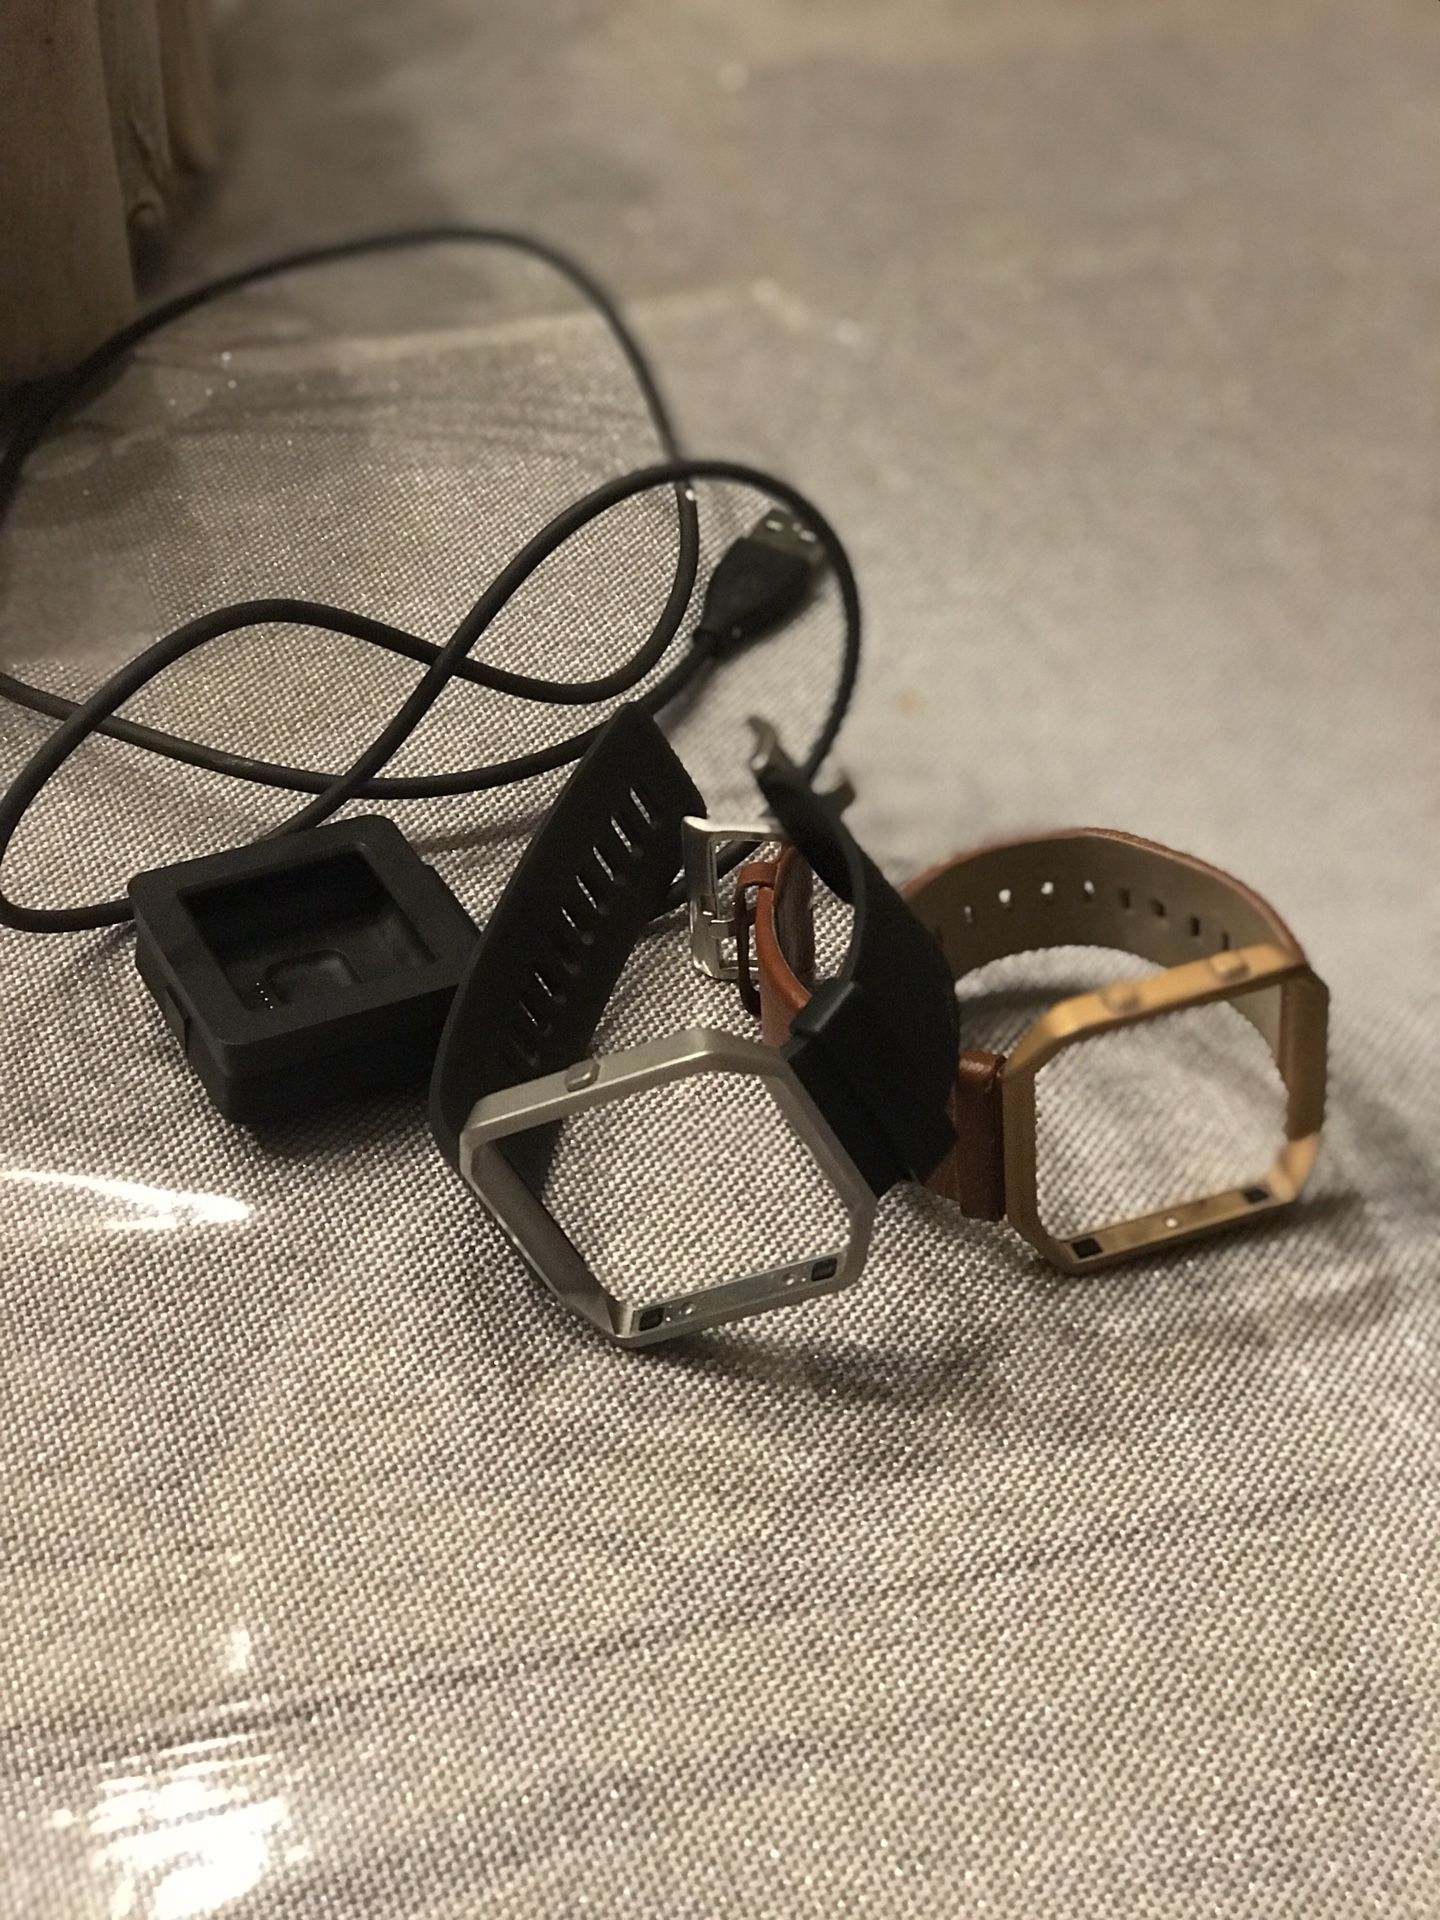 Fitbit blaze bands and charger